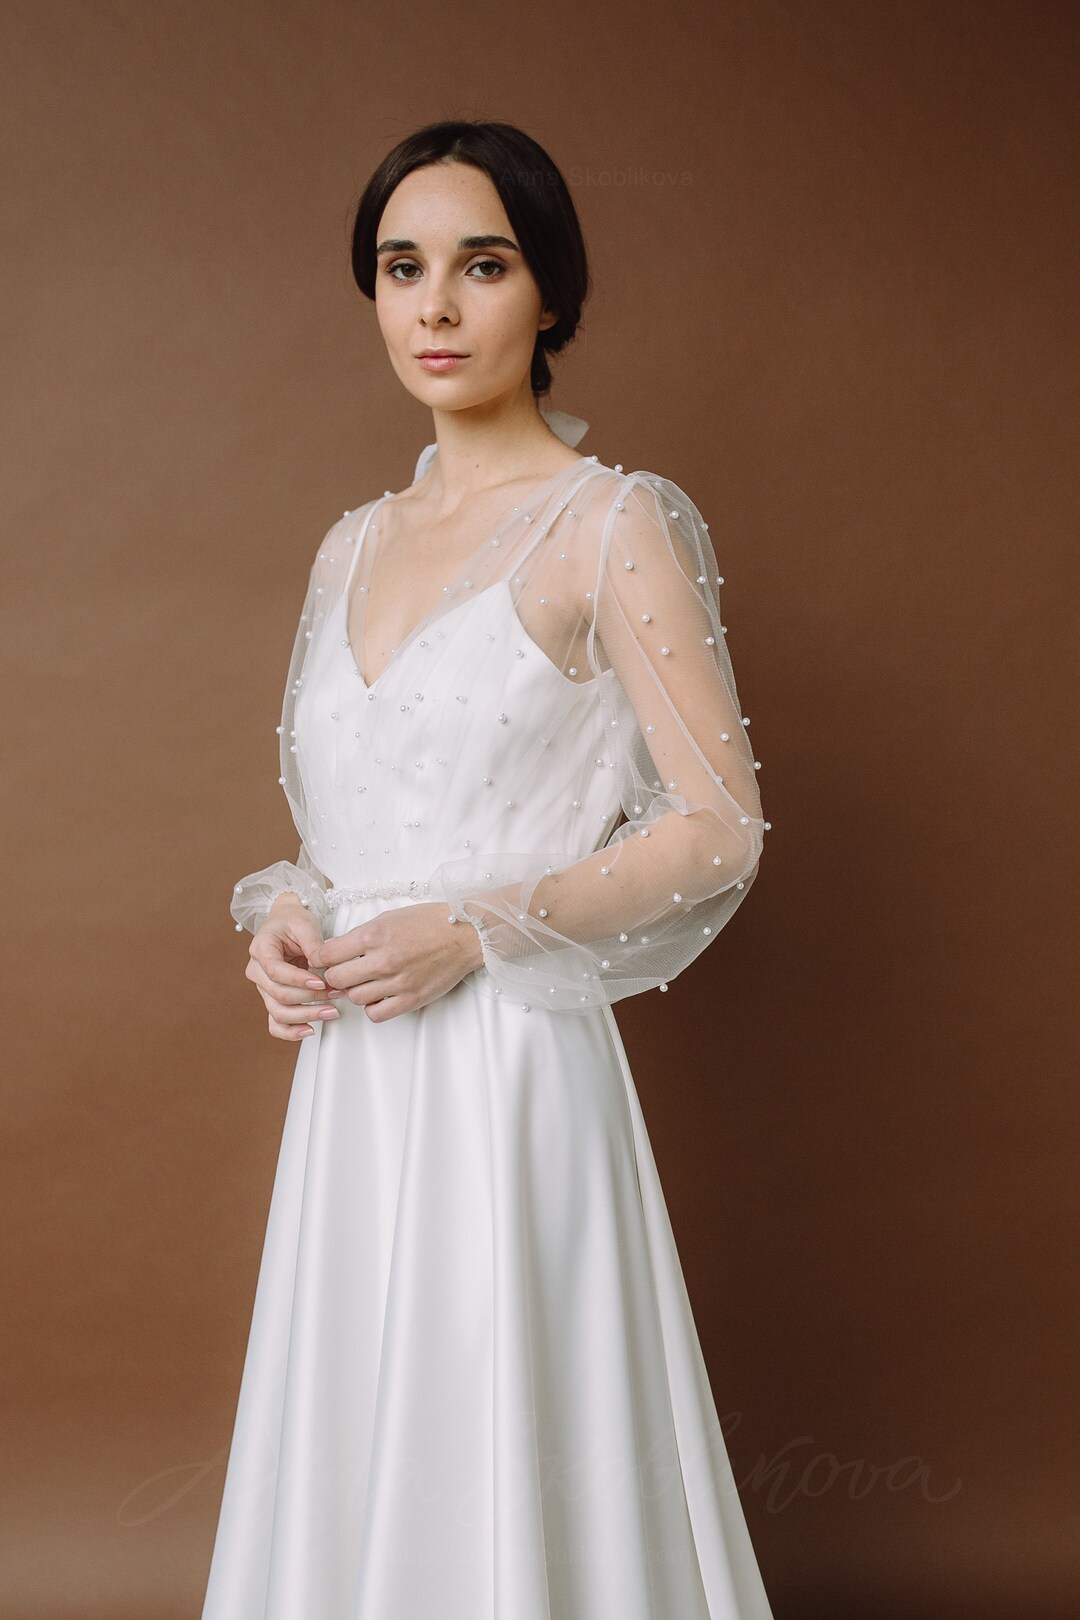 Romantic Wedding Dress With Pearls and a Line Silhouette - Etsy